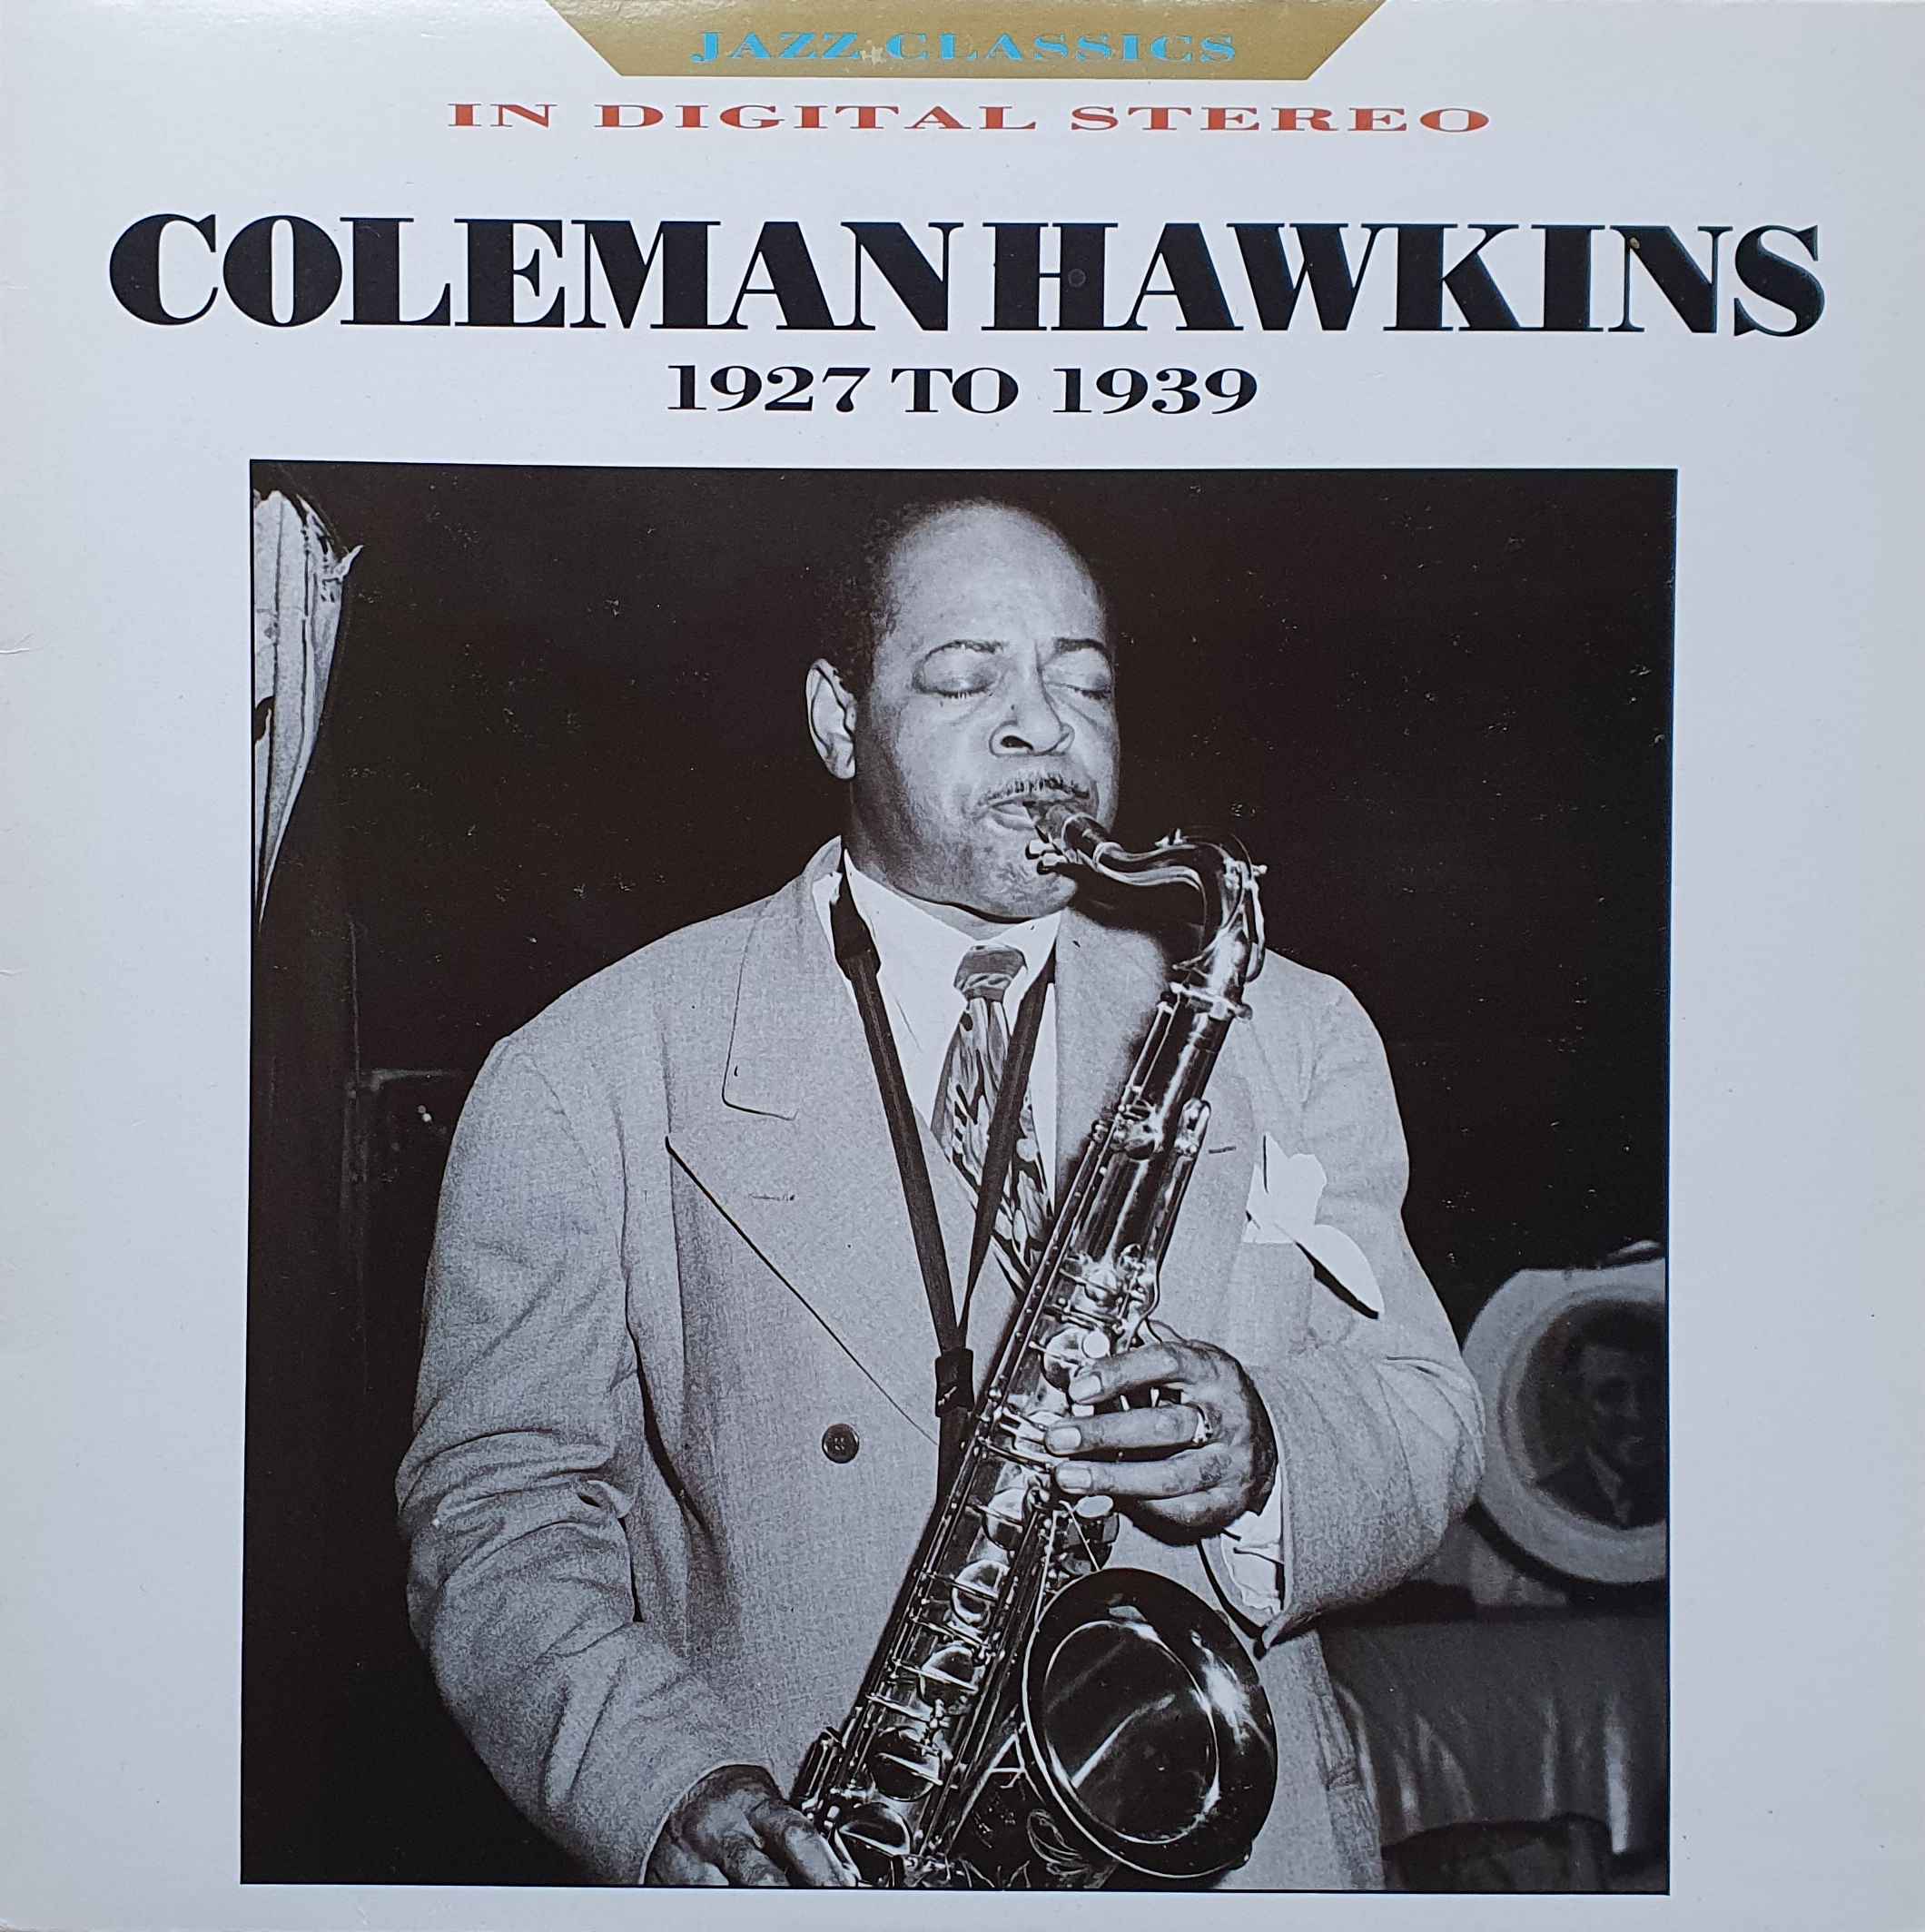 Picture of REB 698 Jazz classics - Coleman Hawkins by artist Coleman Hawkins from the BBC albums - Records and Tapes library